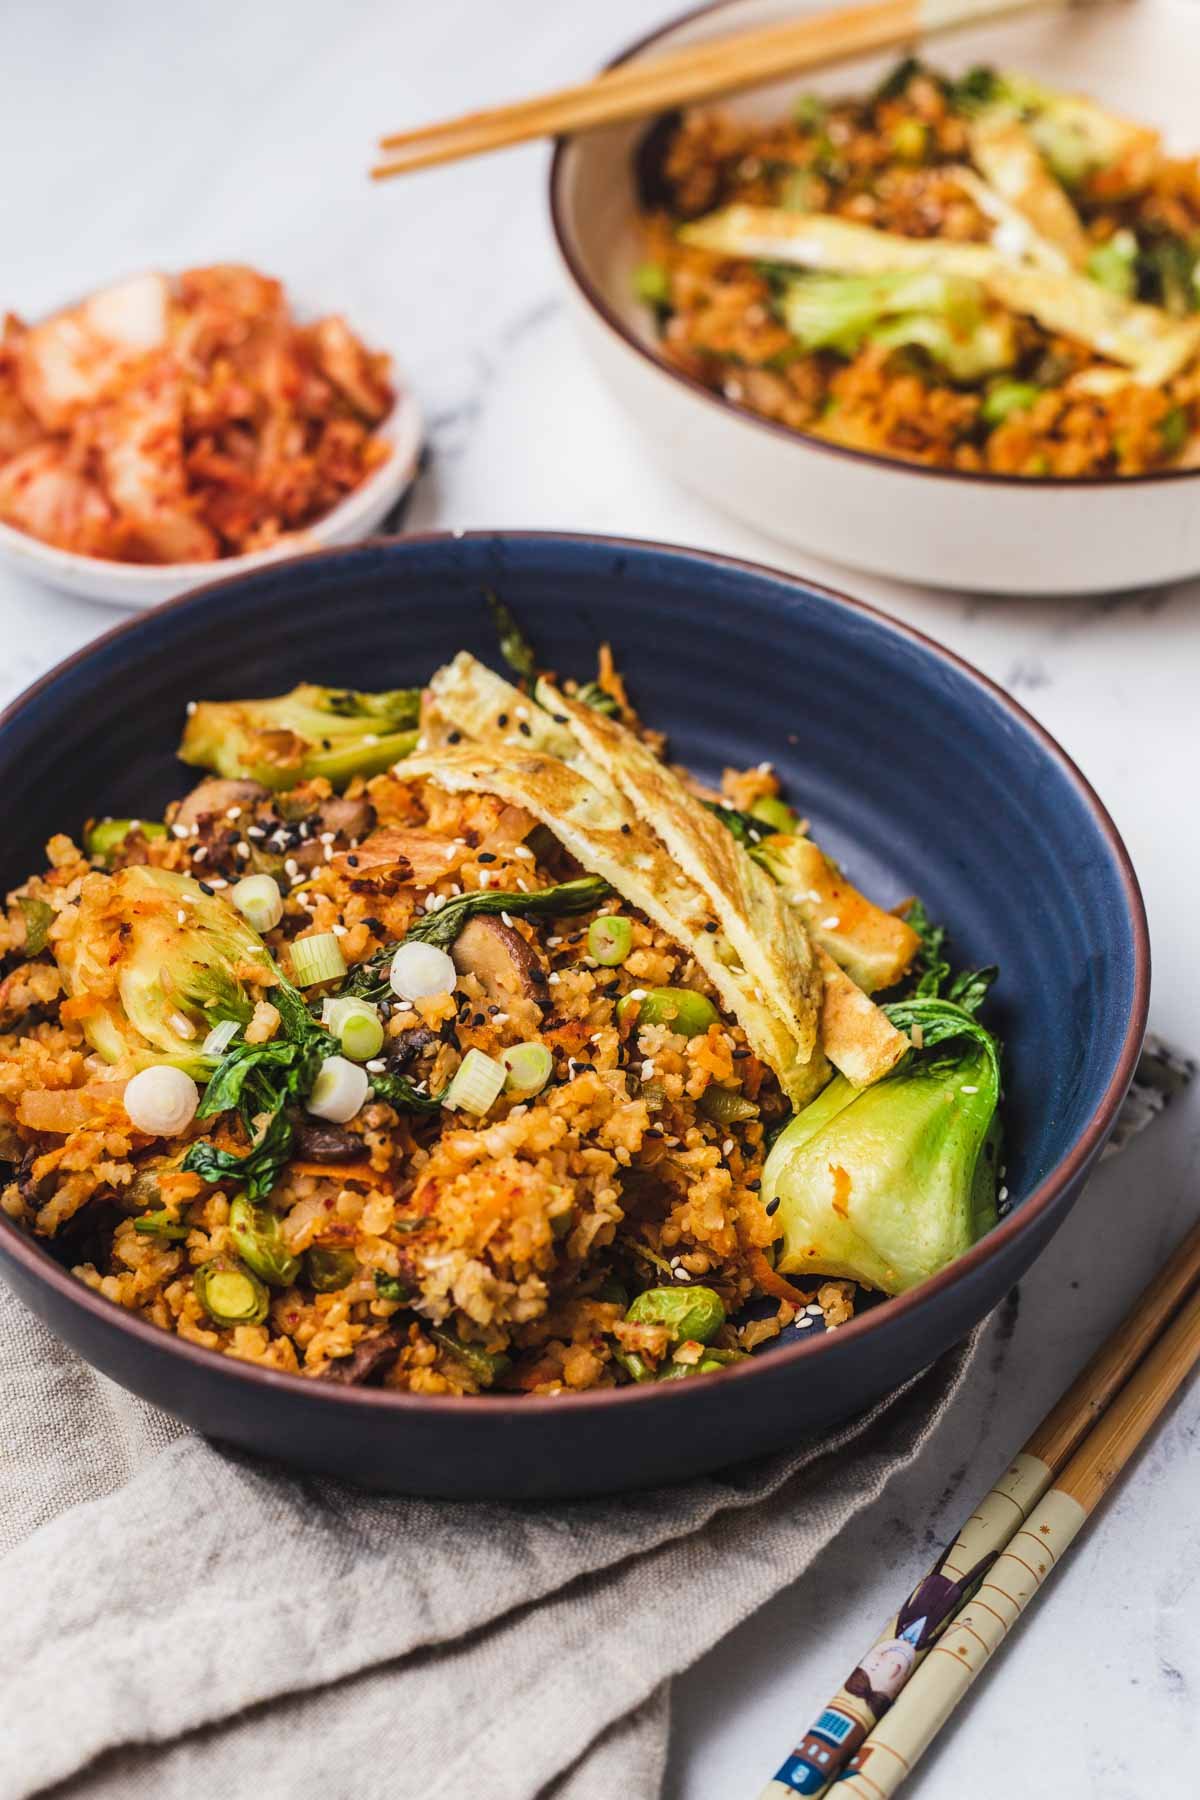 A close up of the kimchi fried rice recipe in a blue bowl topped with green onions and vegetables with kimchi and a second bowl in the background.